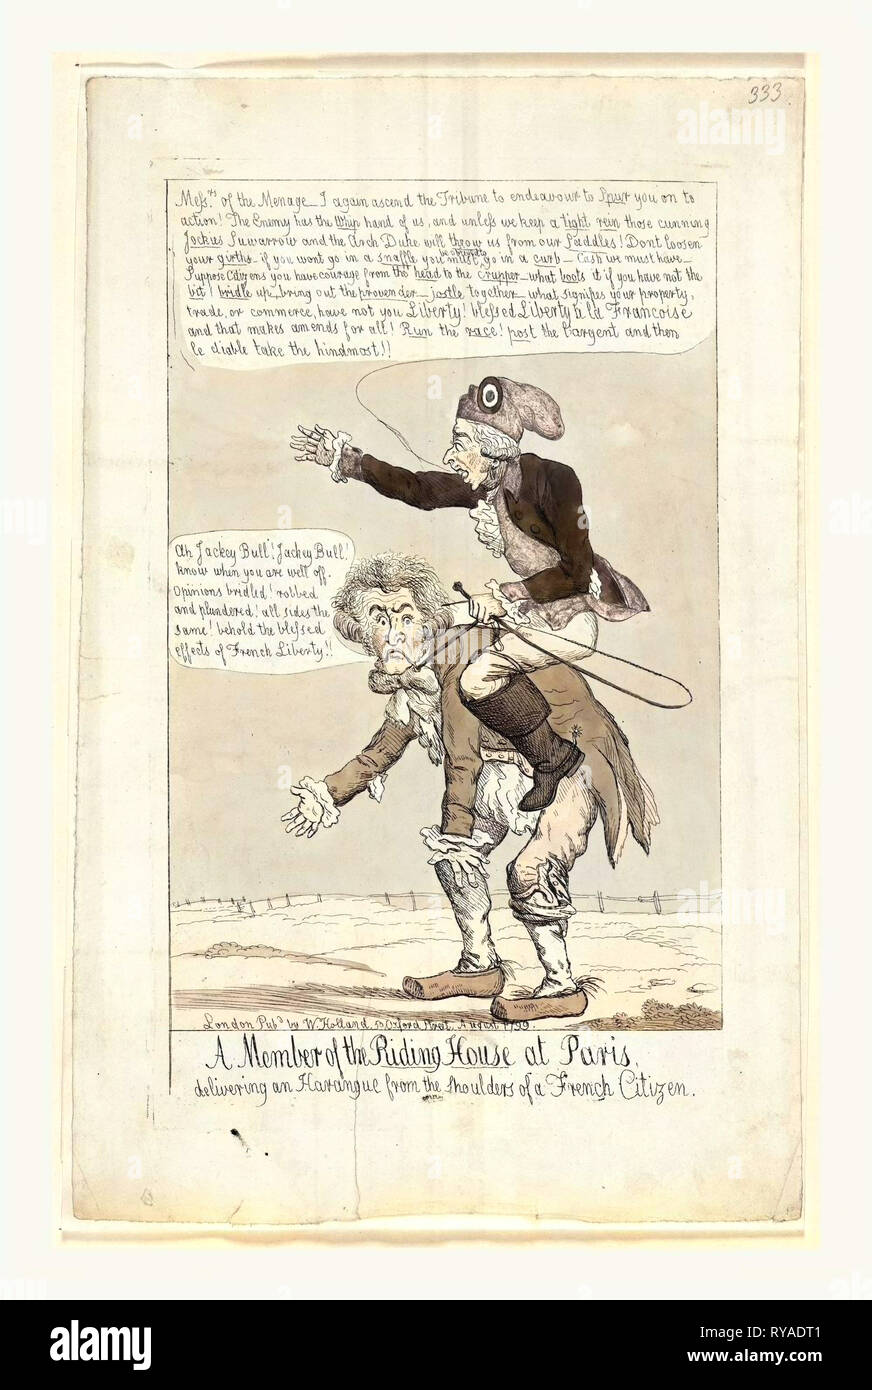 Member of the Riding House at Paris, Delivering an Harangue from the Shoulders of a French Citizen, Holland, William, Active 1782 1817, Engraving 1799, a Member of the New French Aristocracy Wearing a Phrygian or Liberty Cap with Circular Emblem, Riding on the Back of a French Citizen, He Implores, Messrs. of the Menage - I Again Ascend the Tribune to Endeavour to Spur You on to Action! the Enemy Has the Whip Hand of Us, and Unless We Keep a Tight Rein Those Cunning Jockies Suwarrow and the Arch Duke Will Throw Us from Our Saddles, in 1799, Russian Forces Under Field Marshal Aleksandr Stock Photo